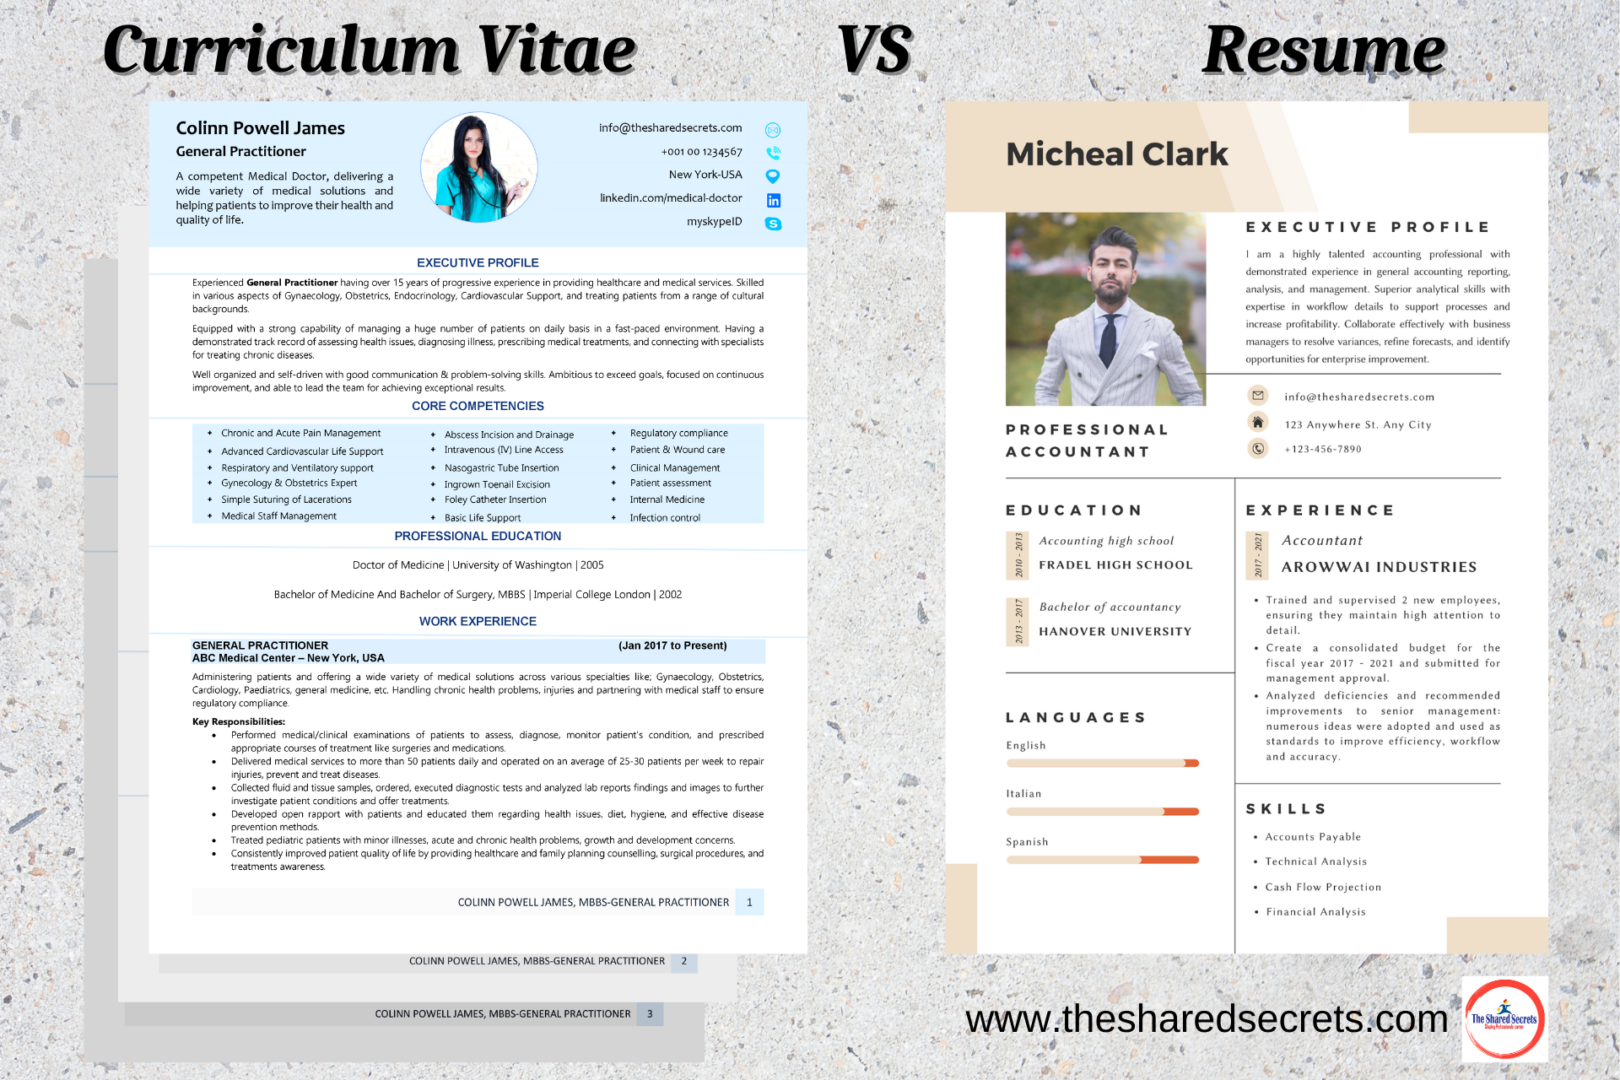 What are the differences between a resume and a CV?